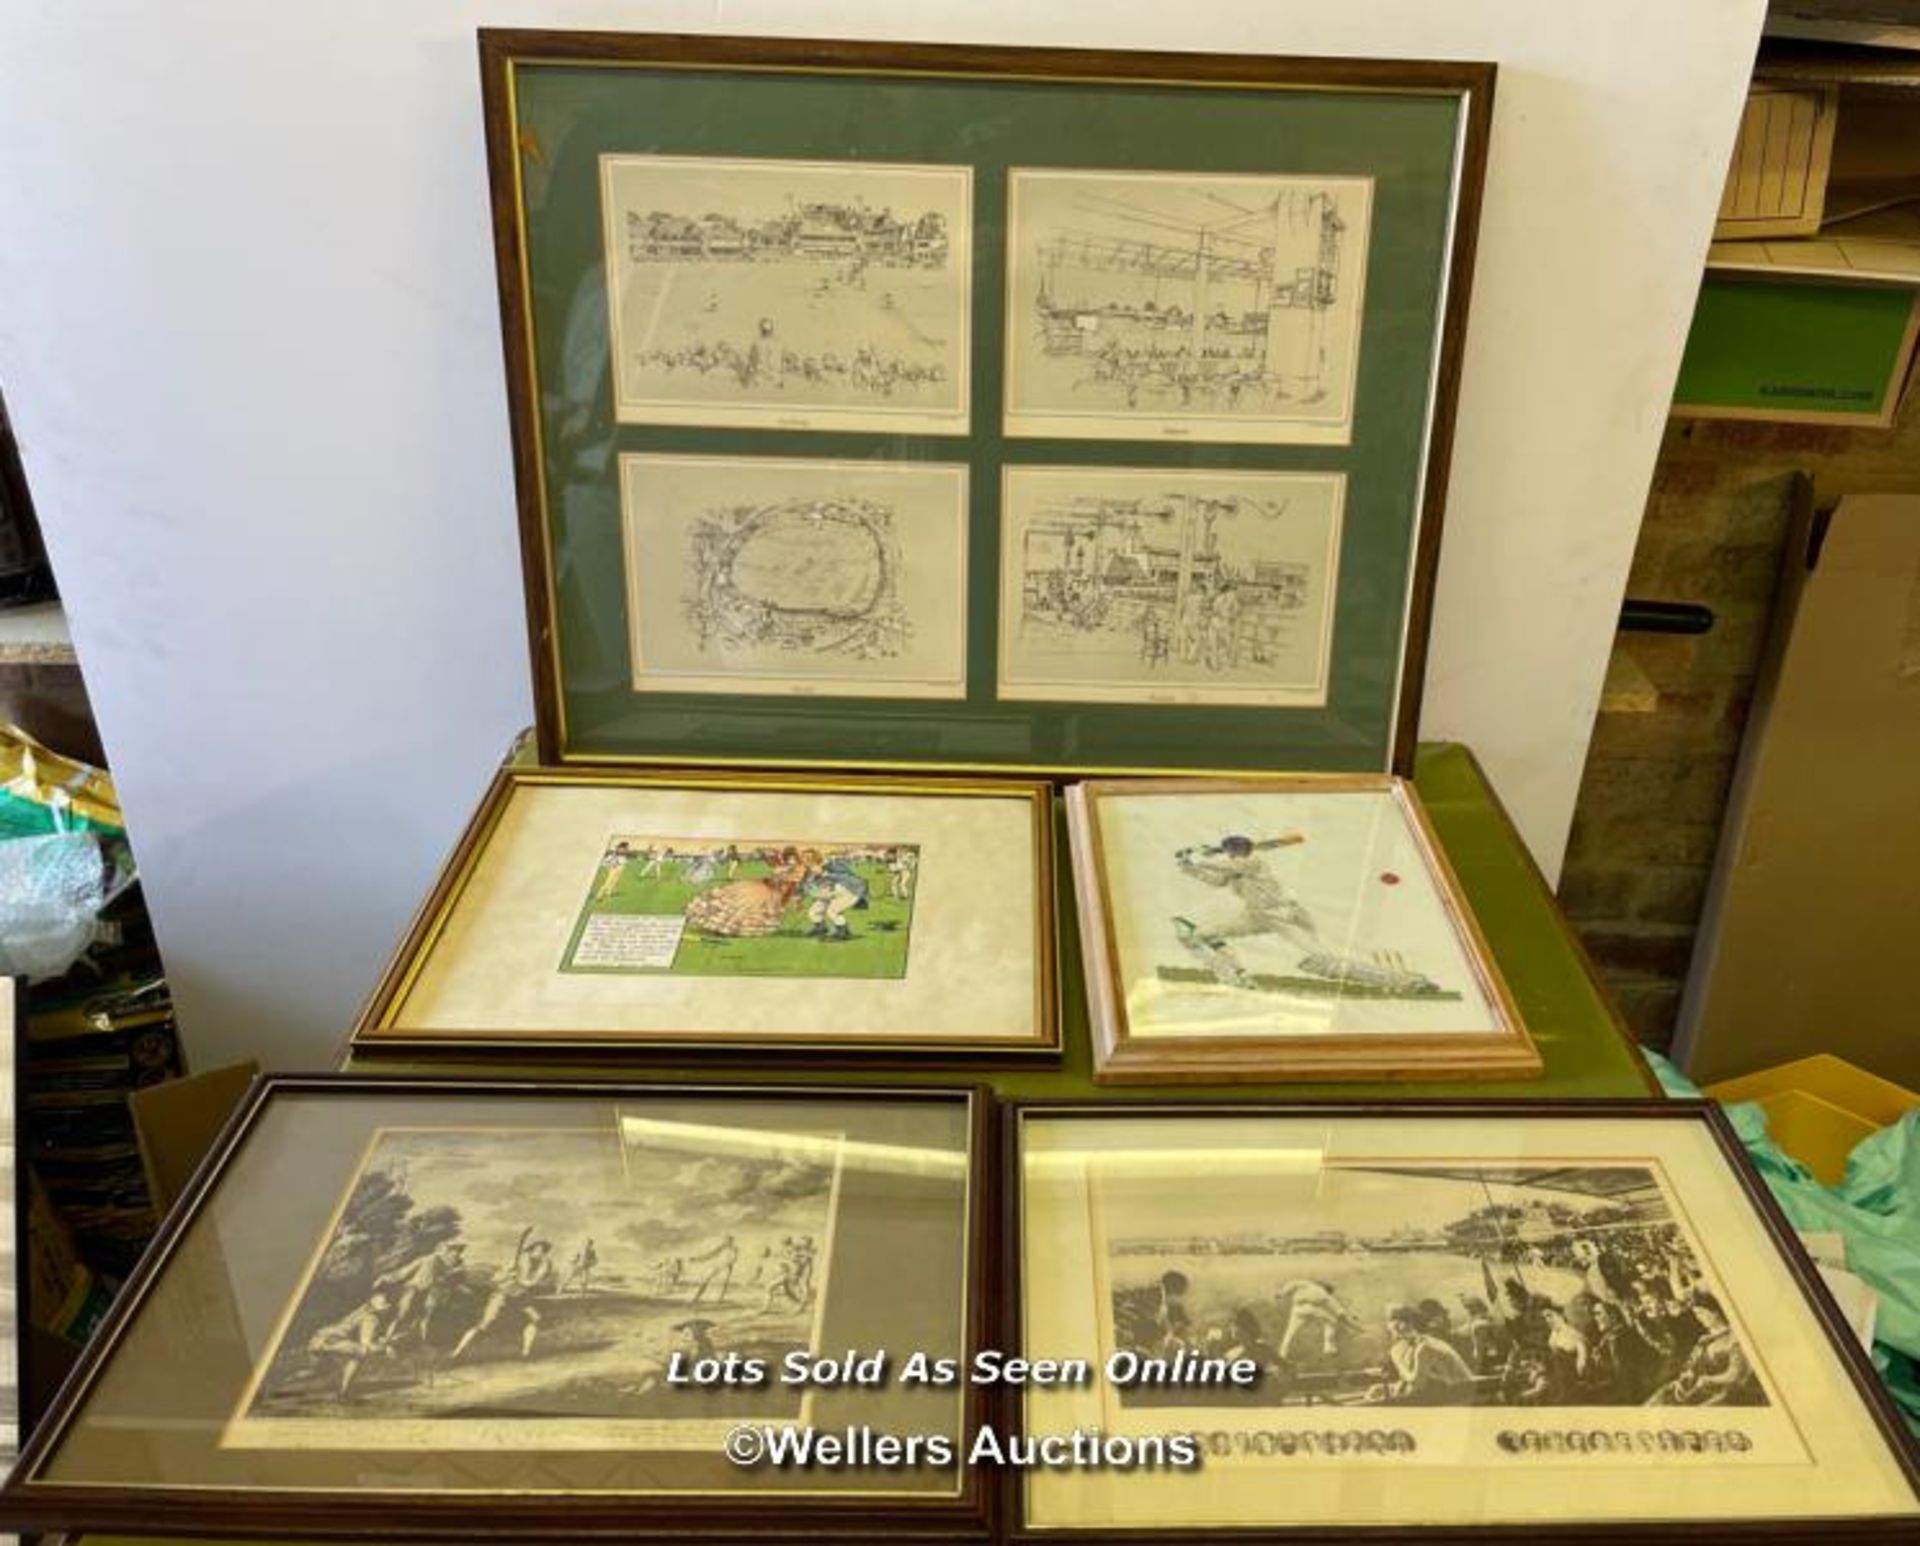 FIVE FRAMED AND GLAZED CRICKET RELATED PRINTS, INCLUDING A CROSS STITCHED PICTURE OF A CRICKETER - Image 7 of 7